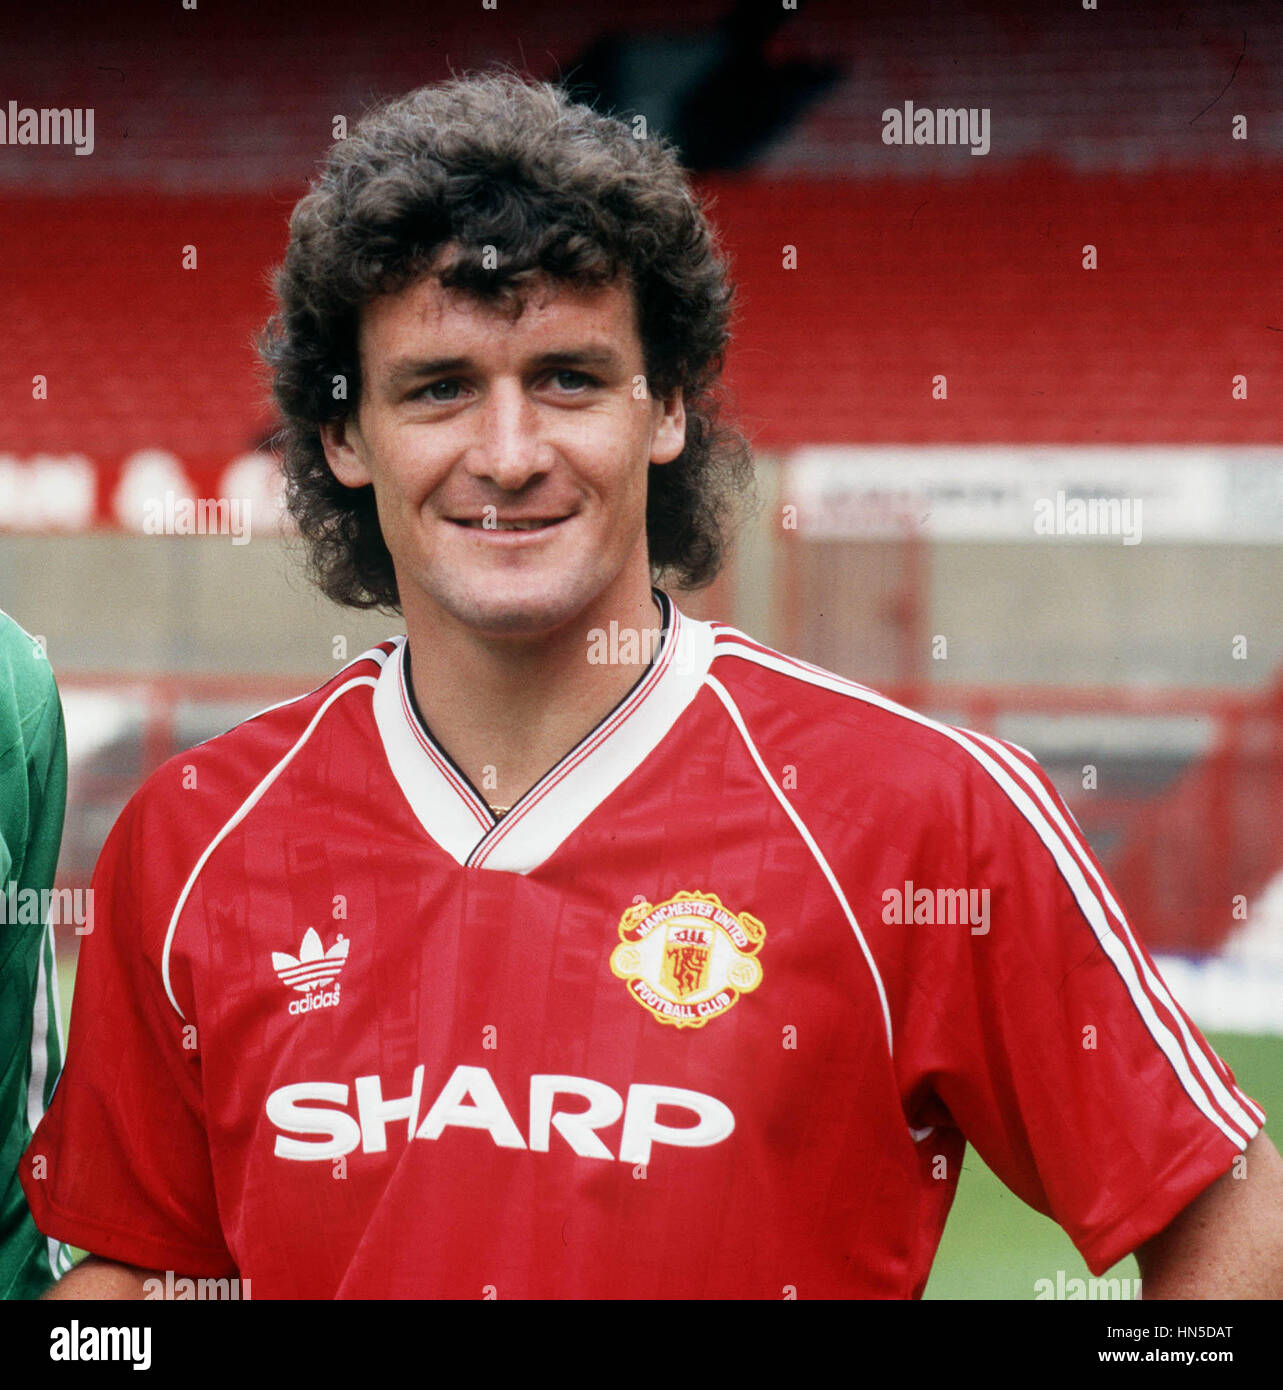 MARK HUGHES MANCHESTER UNITED FC OLD TRAFFORD MANCHESTER 10. August 1988 Stockfoto